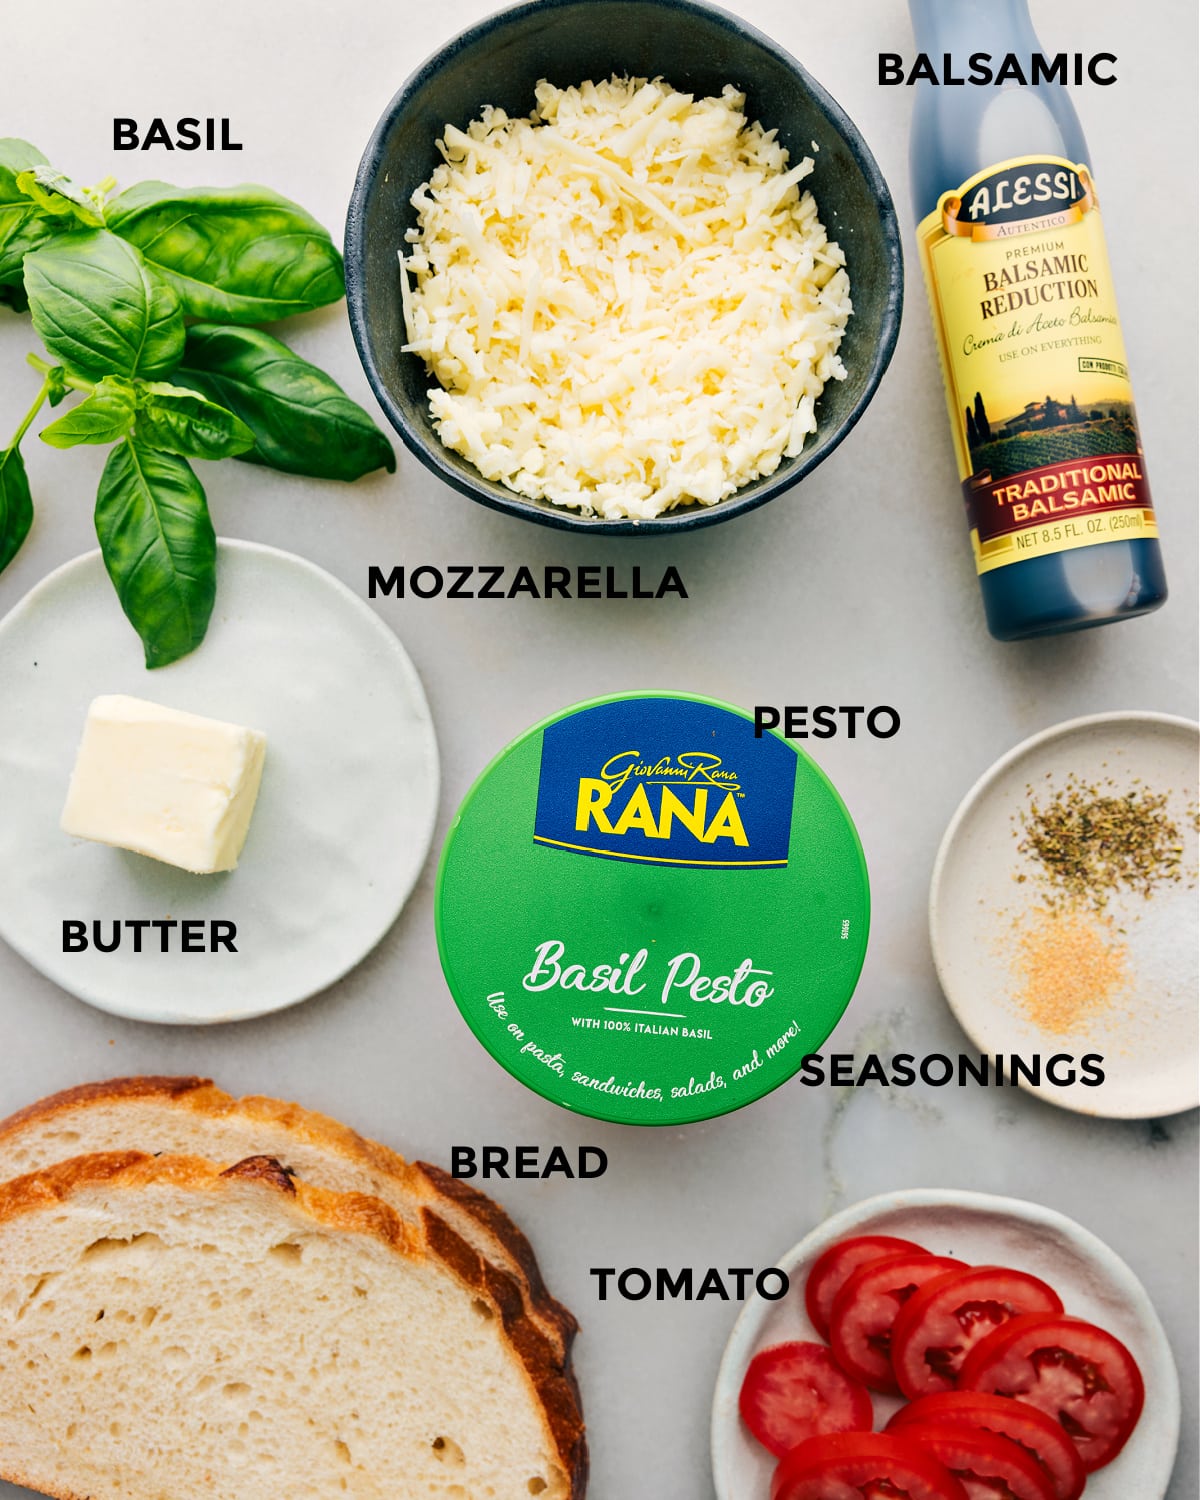 The ingredients in this recipe prepped for easy assembly including basil, balsamic, mozzarella, pesto, butter, seasonings, tomato, and bread.